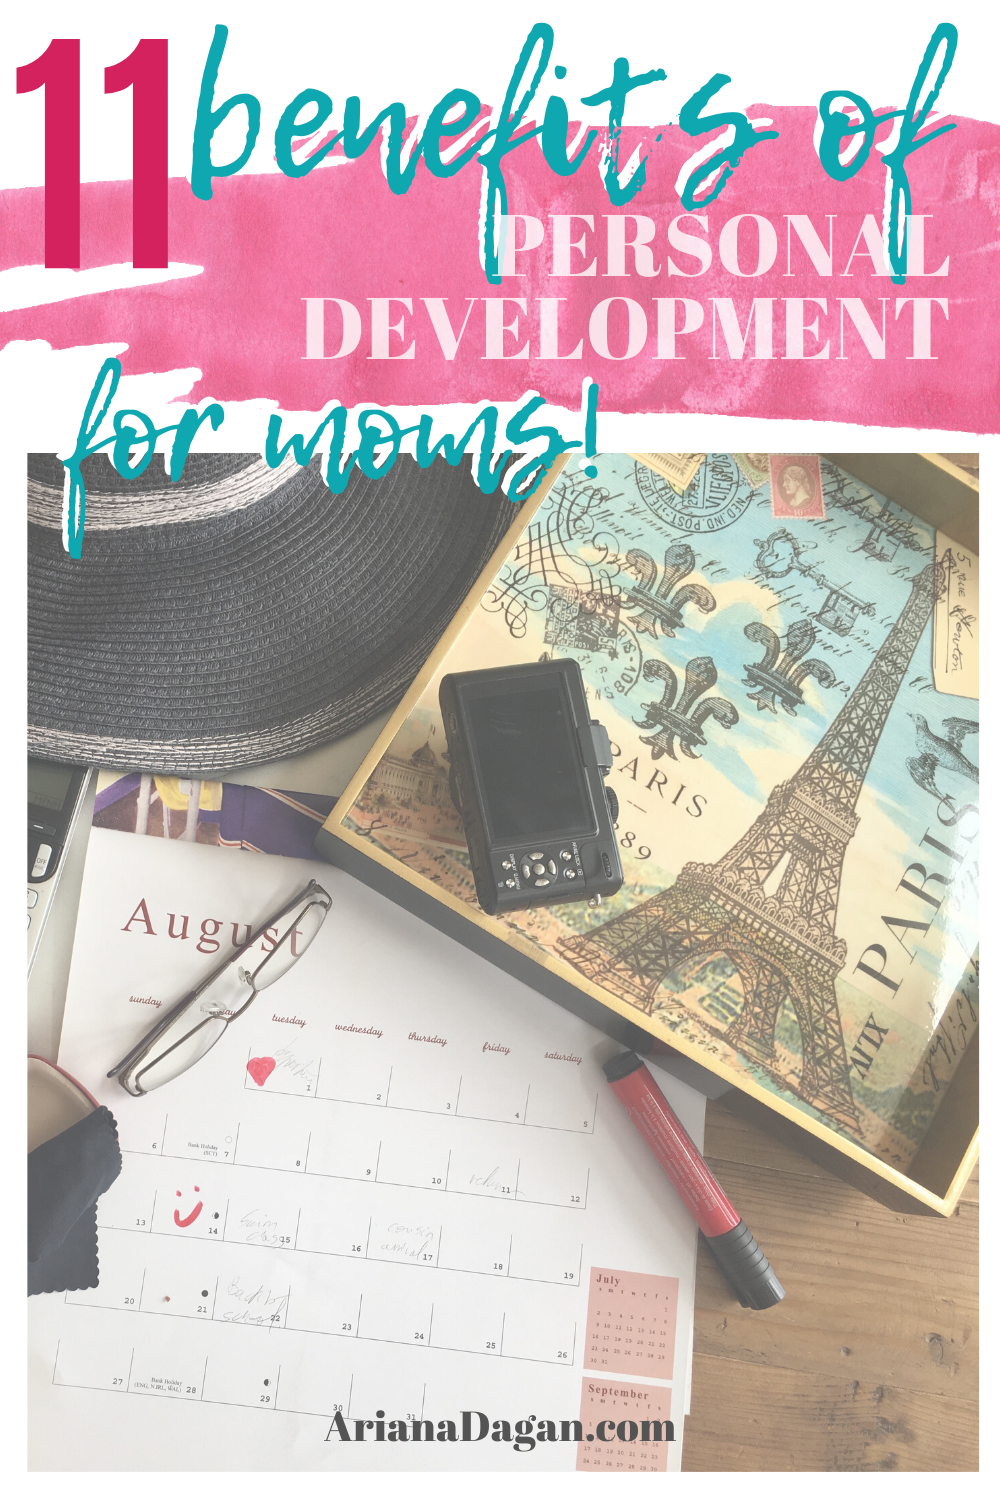 11 Benefits of Personal Development for Moms by Ariana Dagan